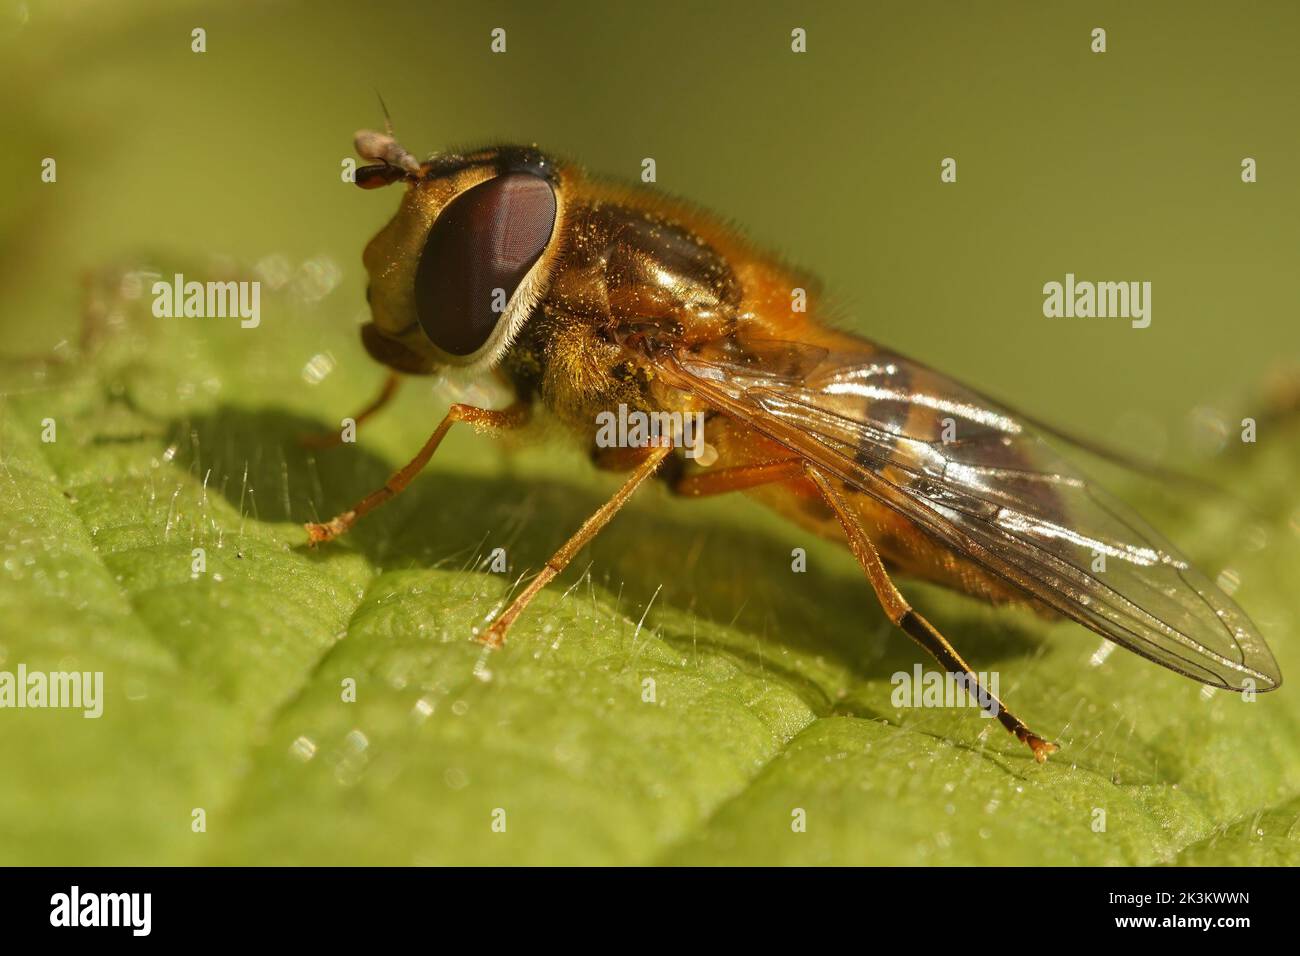 Closeup on a European hoverfly species, Epistrophe eligans sitting on a green leaf in the garden Stock Photo